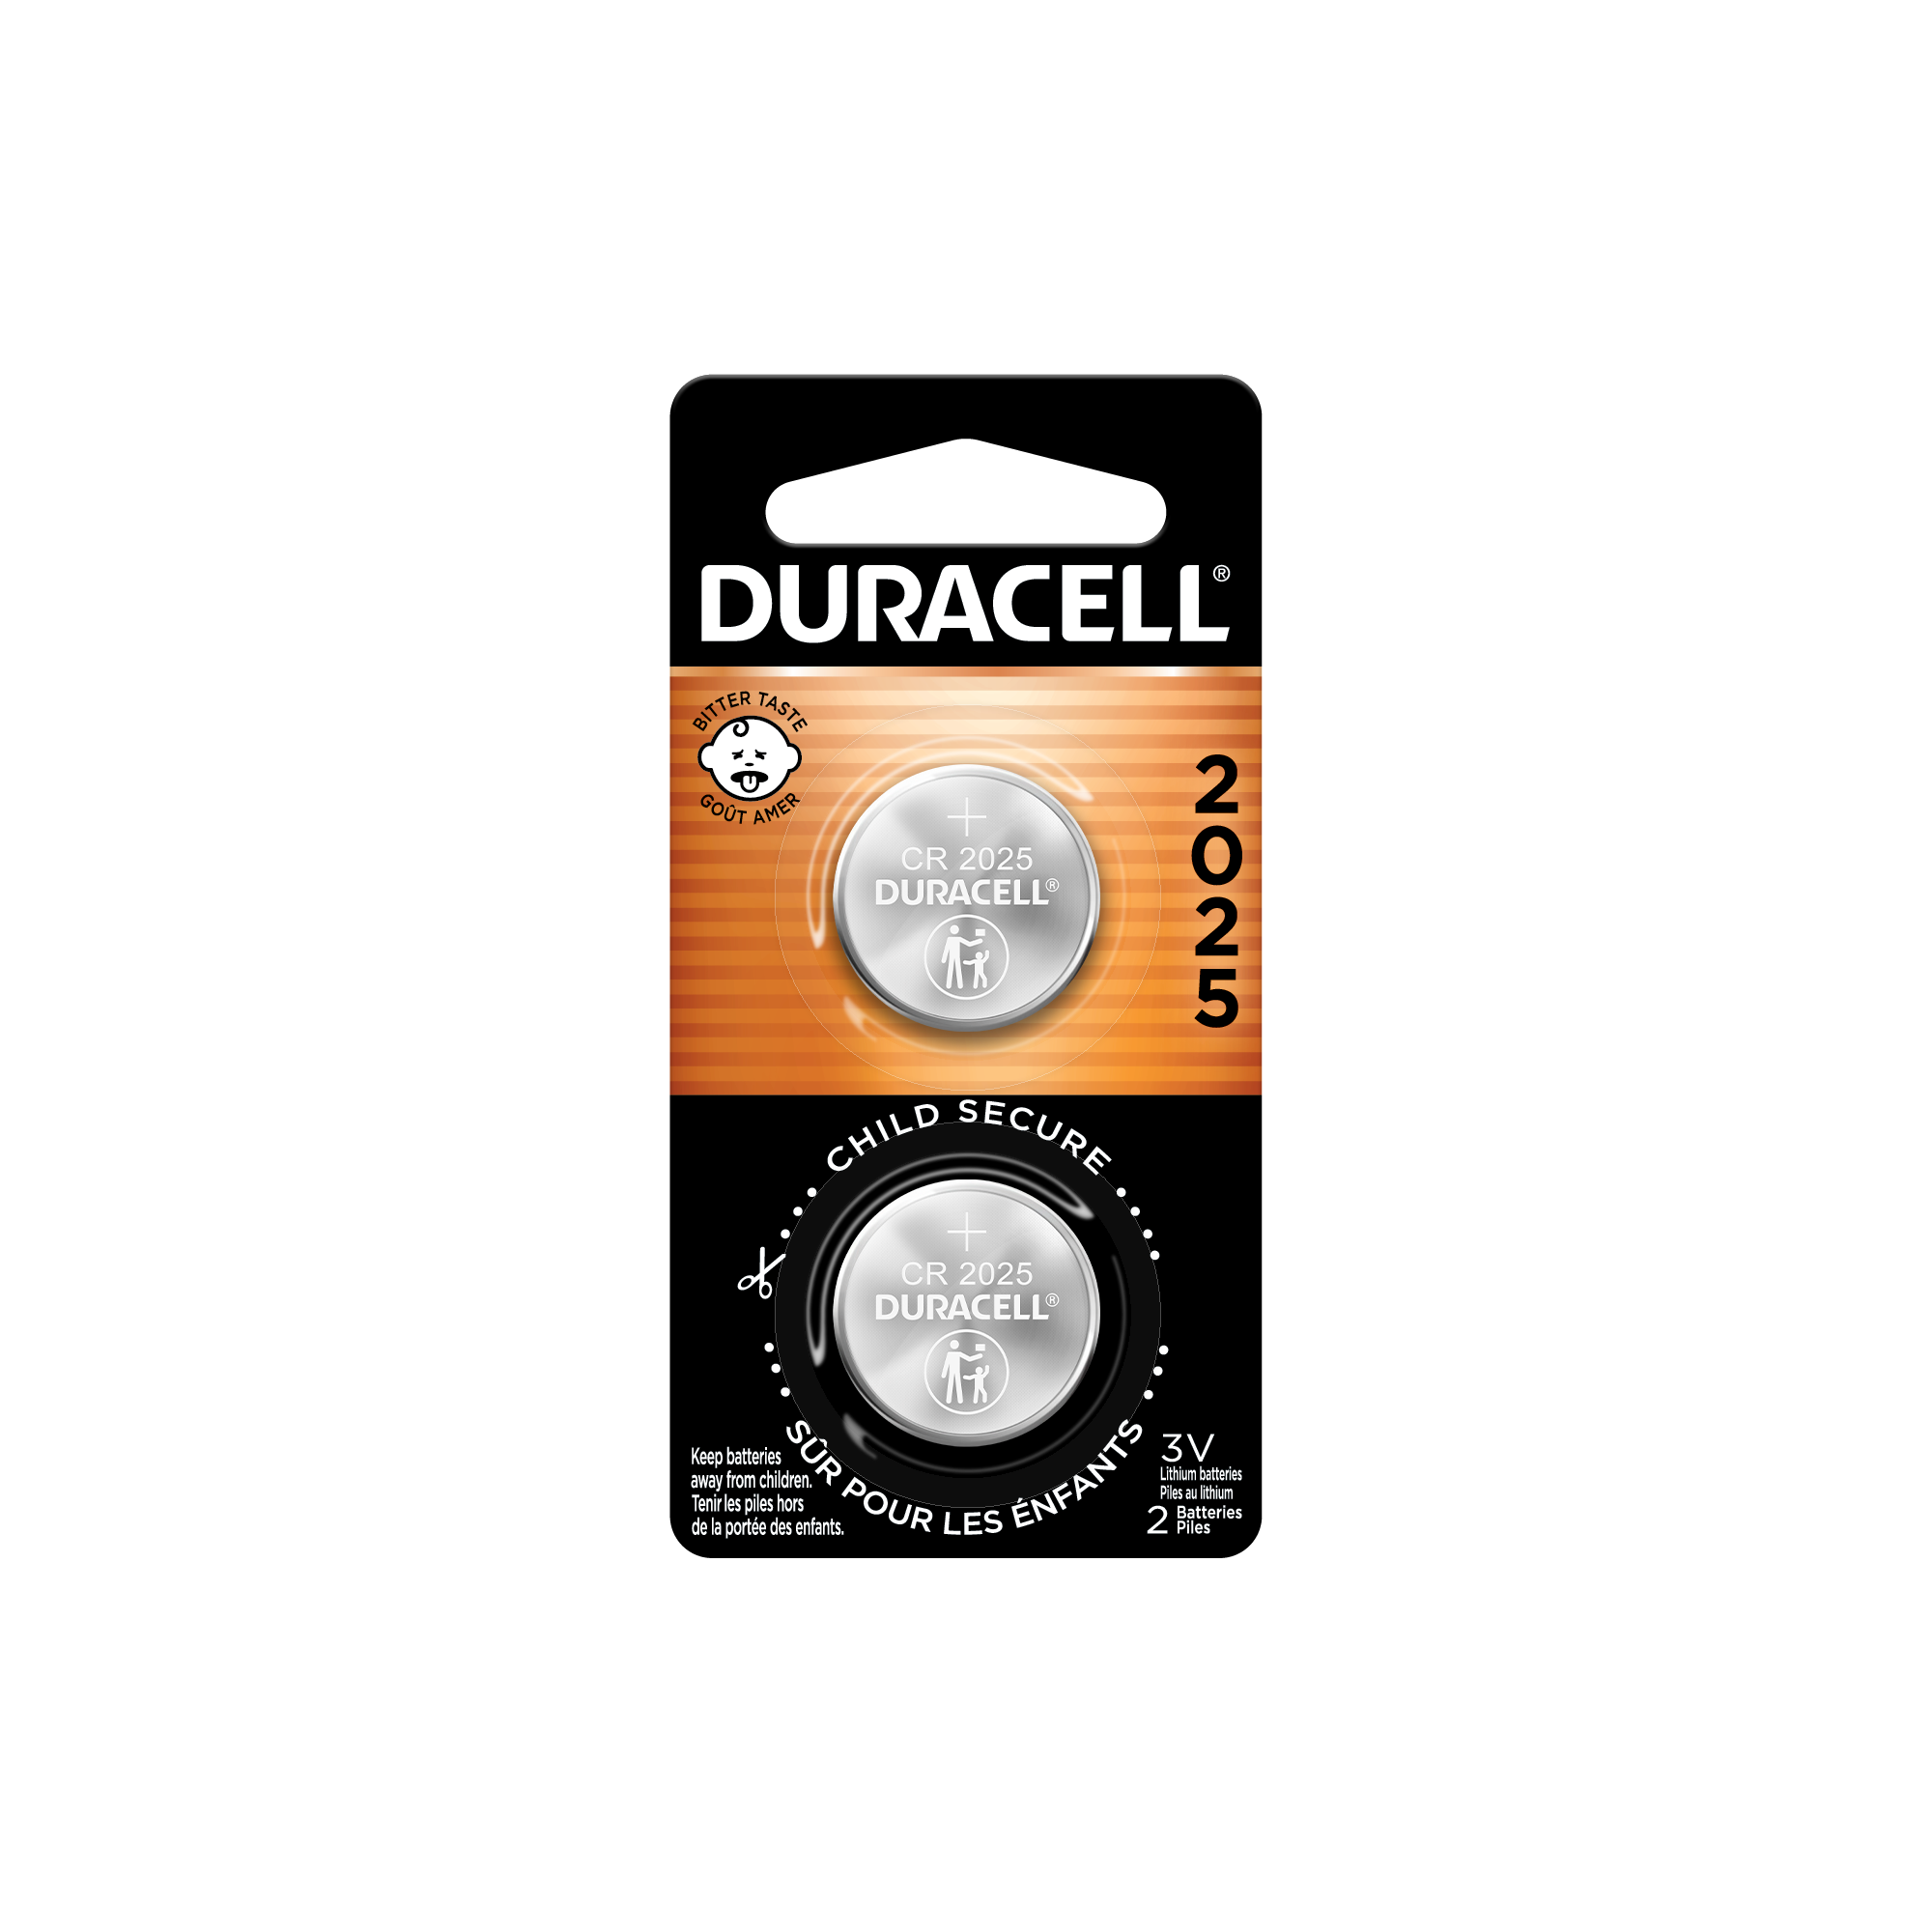 Buy Duracell 2025 Lithium Coin Batteries 3V (CR2025) - Pack of 2, Batteries